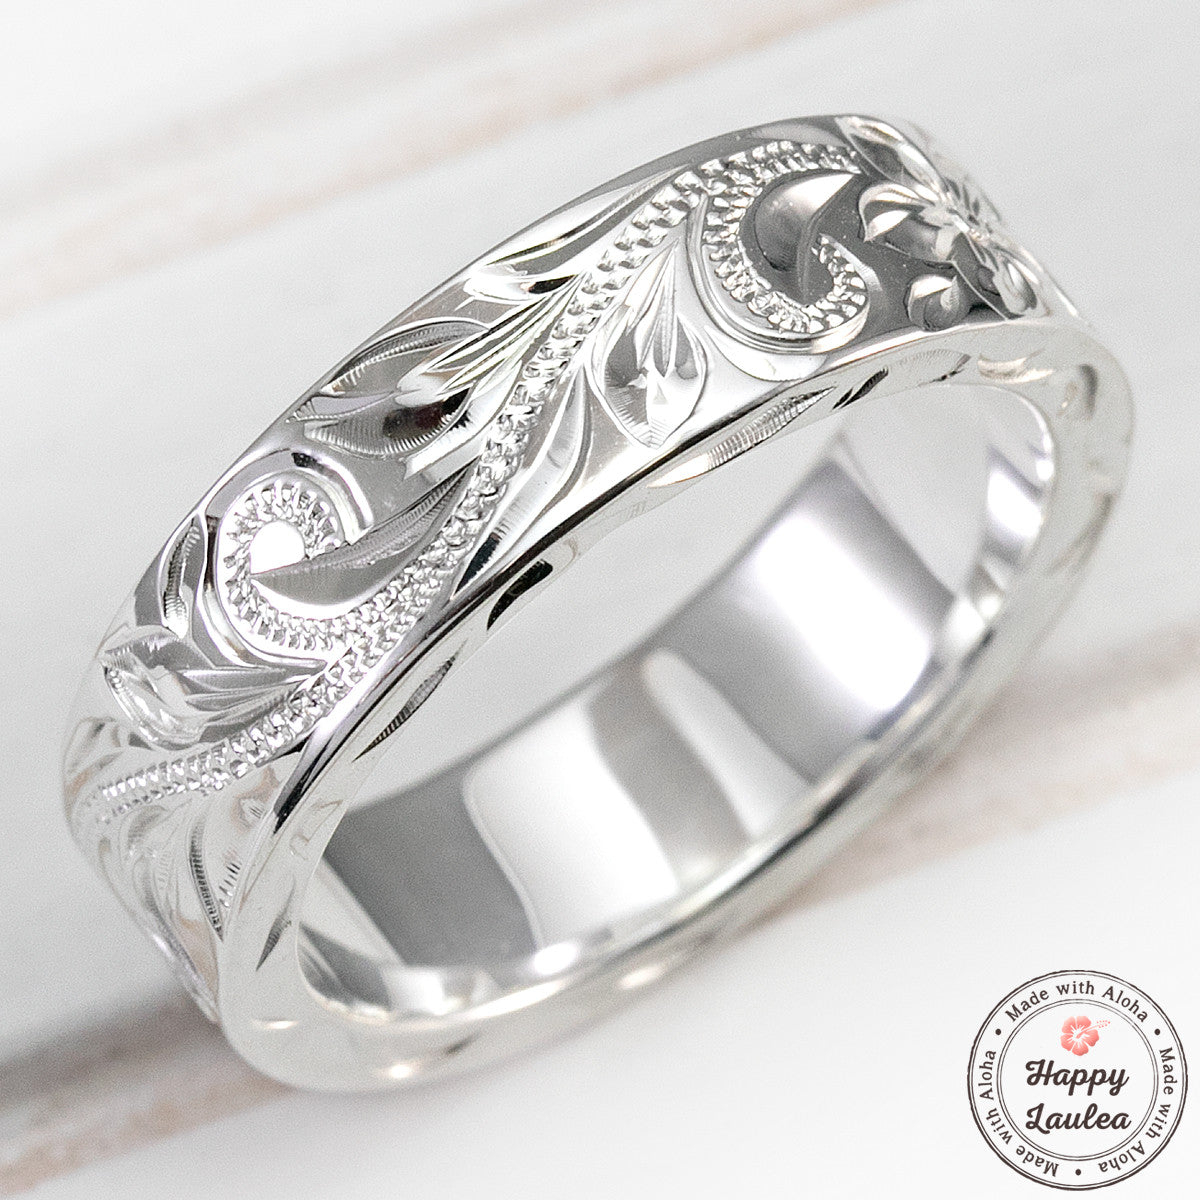 925 Sterling Silver Hawaiian Jewelry Ring - Hand Engraved with Old English  Design - 6x2mm, Flat Shape, Standard Fitment